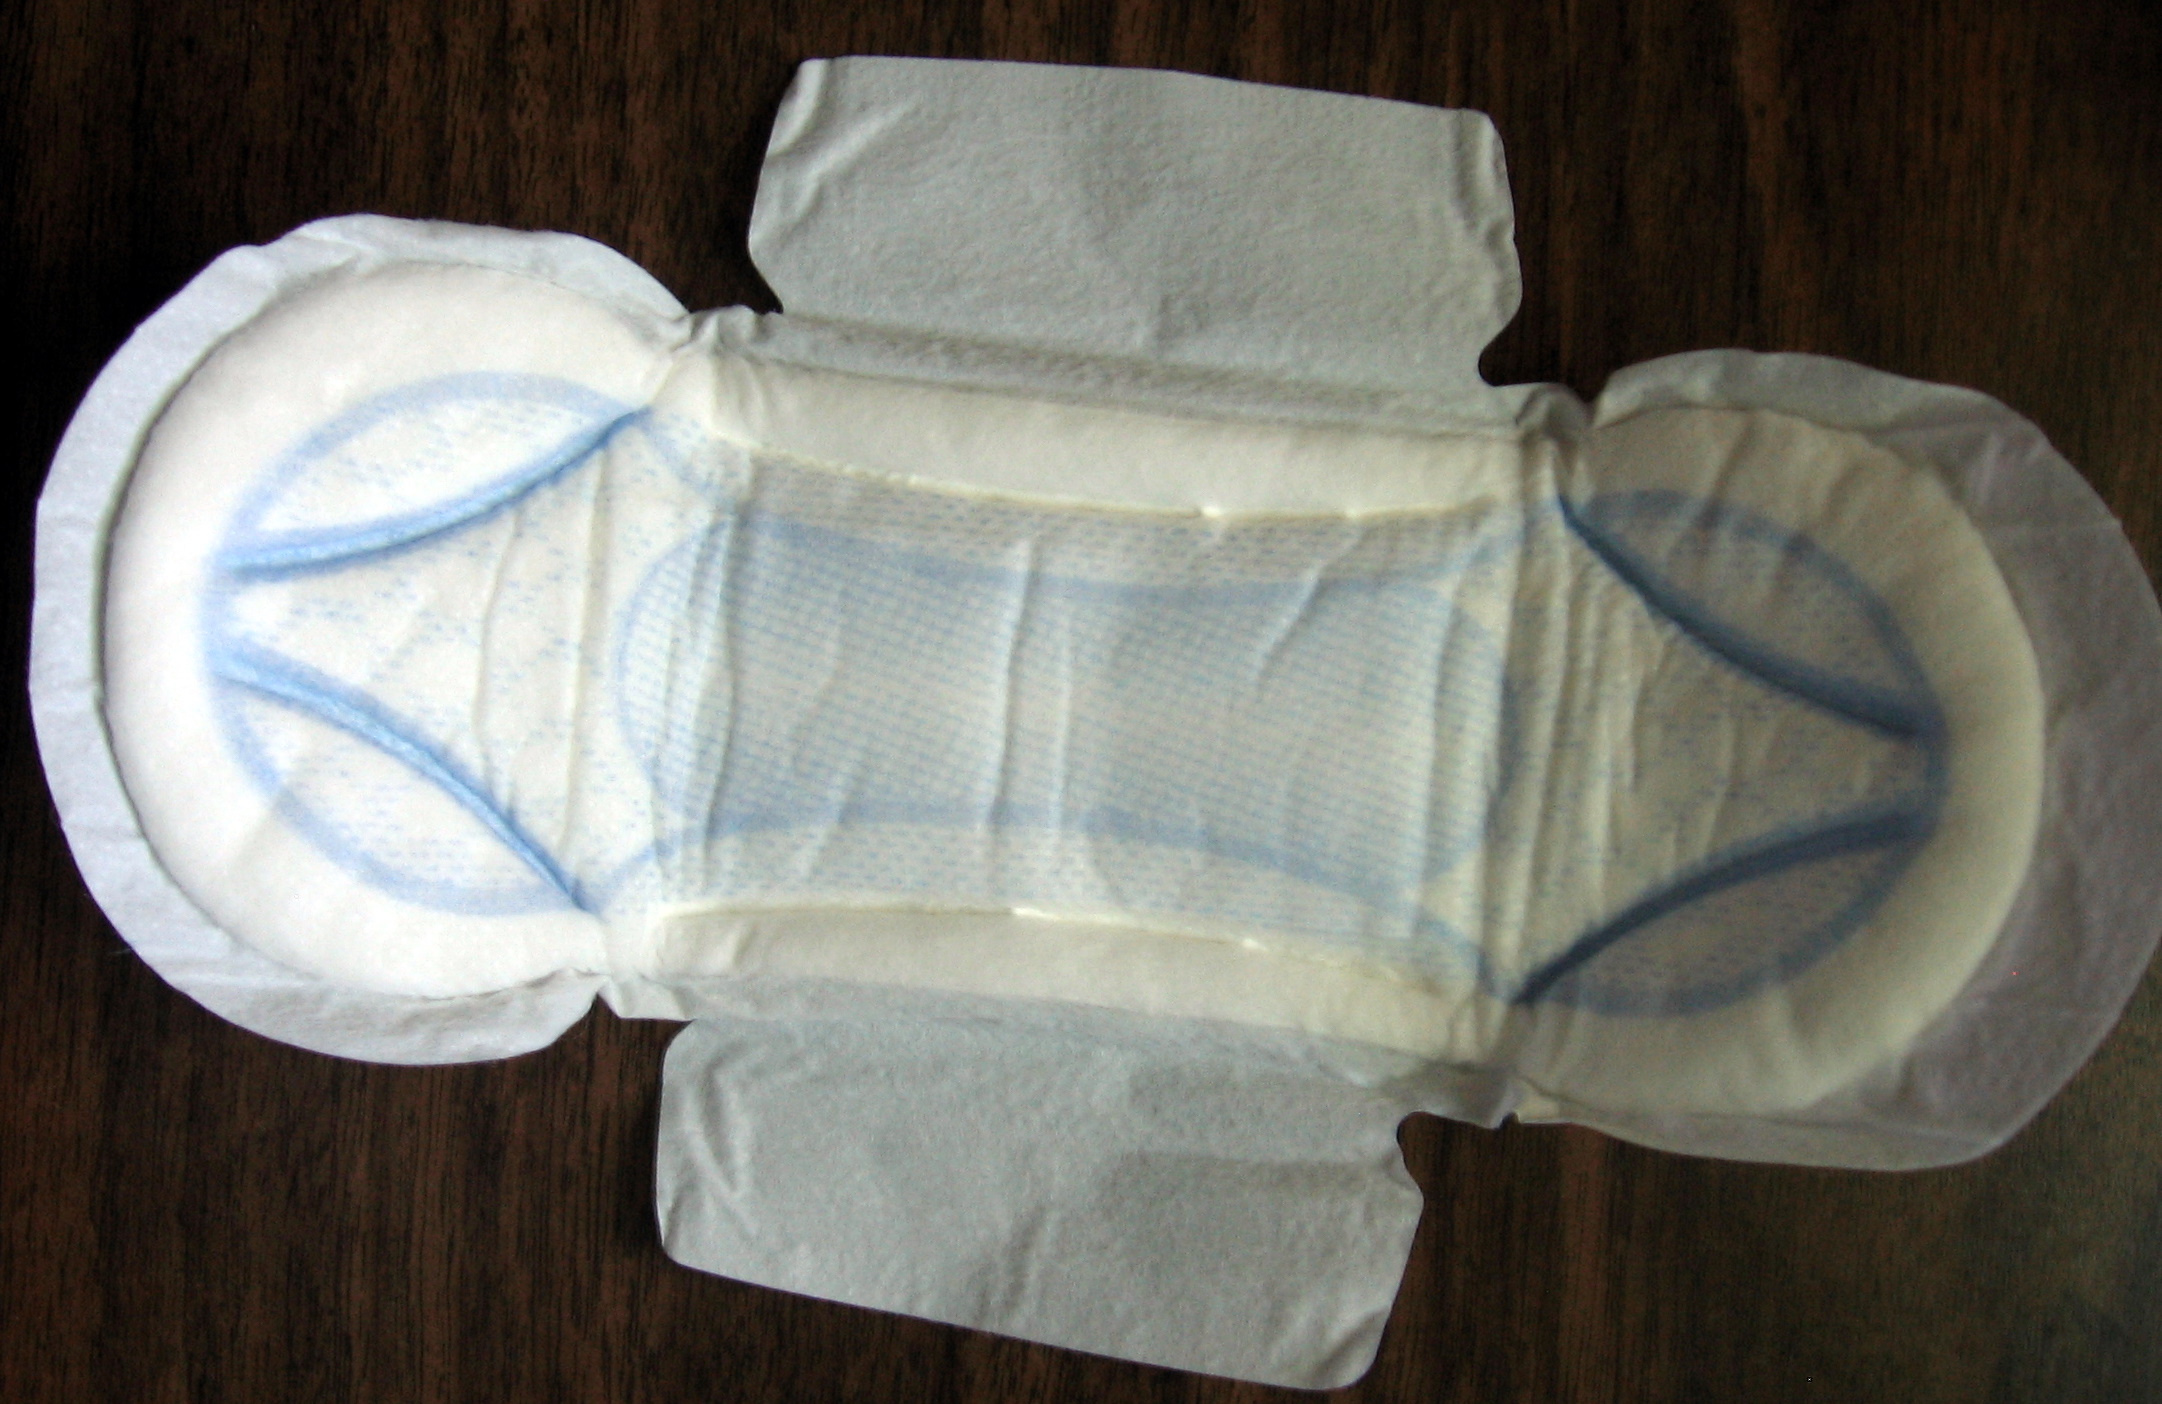 In Gombe Women Boil Used Sanitary Pads and Drink Its Brew to Get High - NDL...